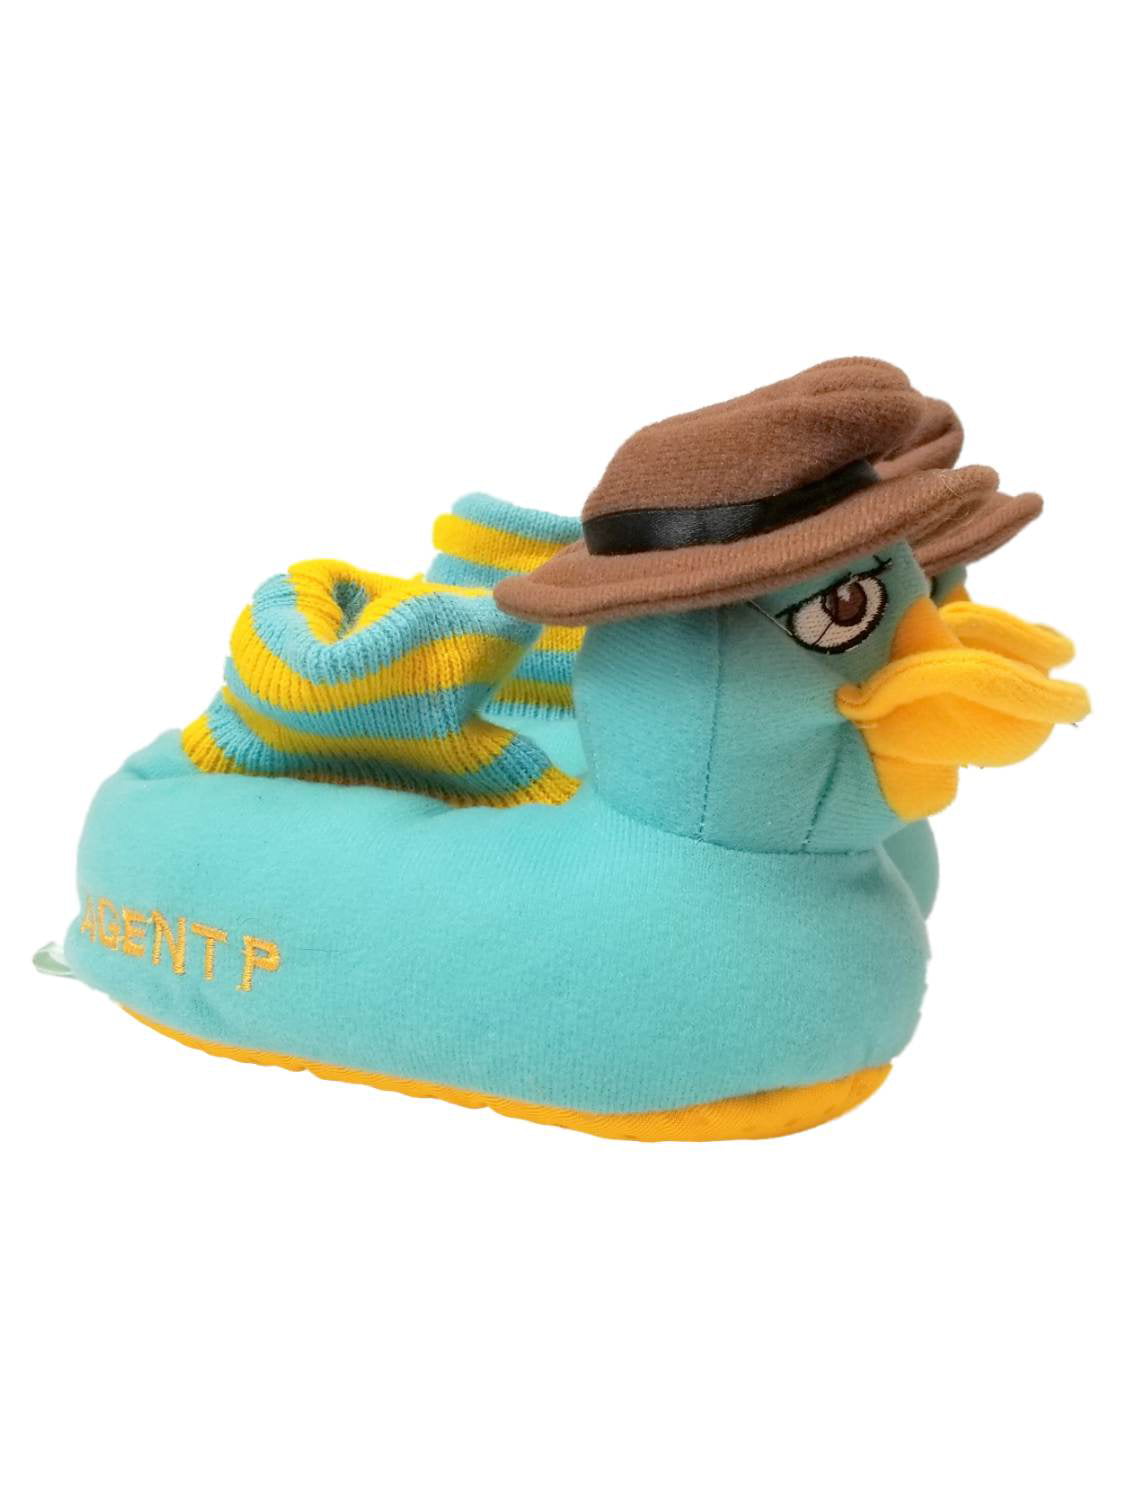 Platypus Slippers House Shoes - Walmart 